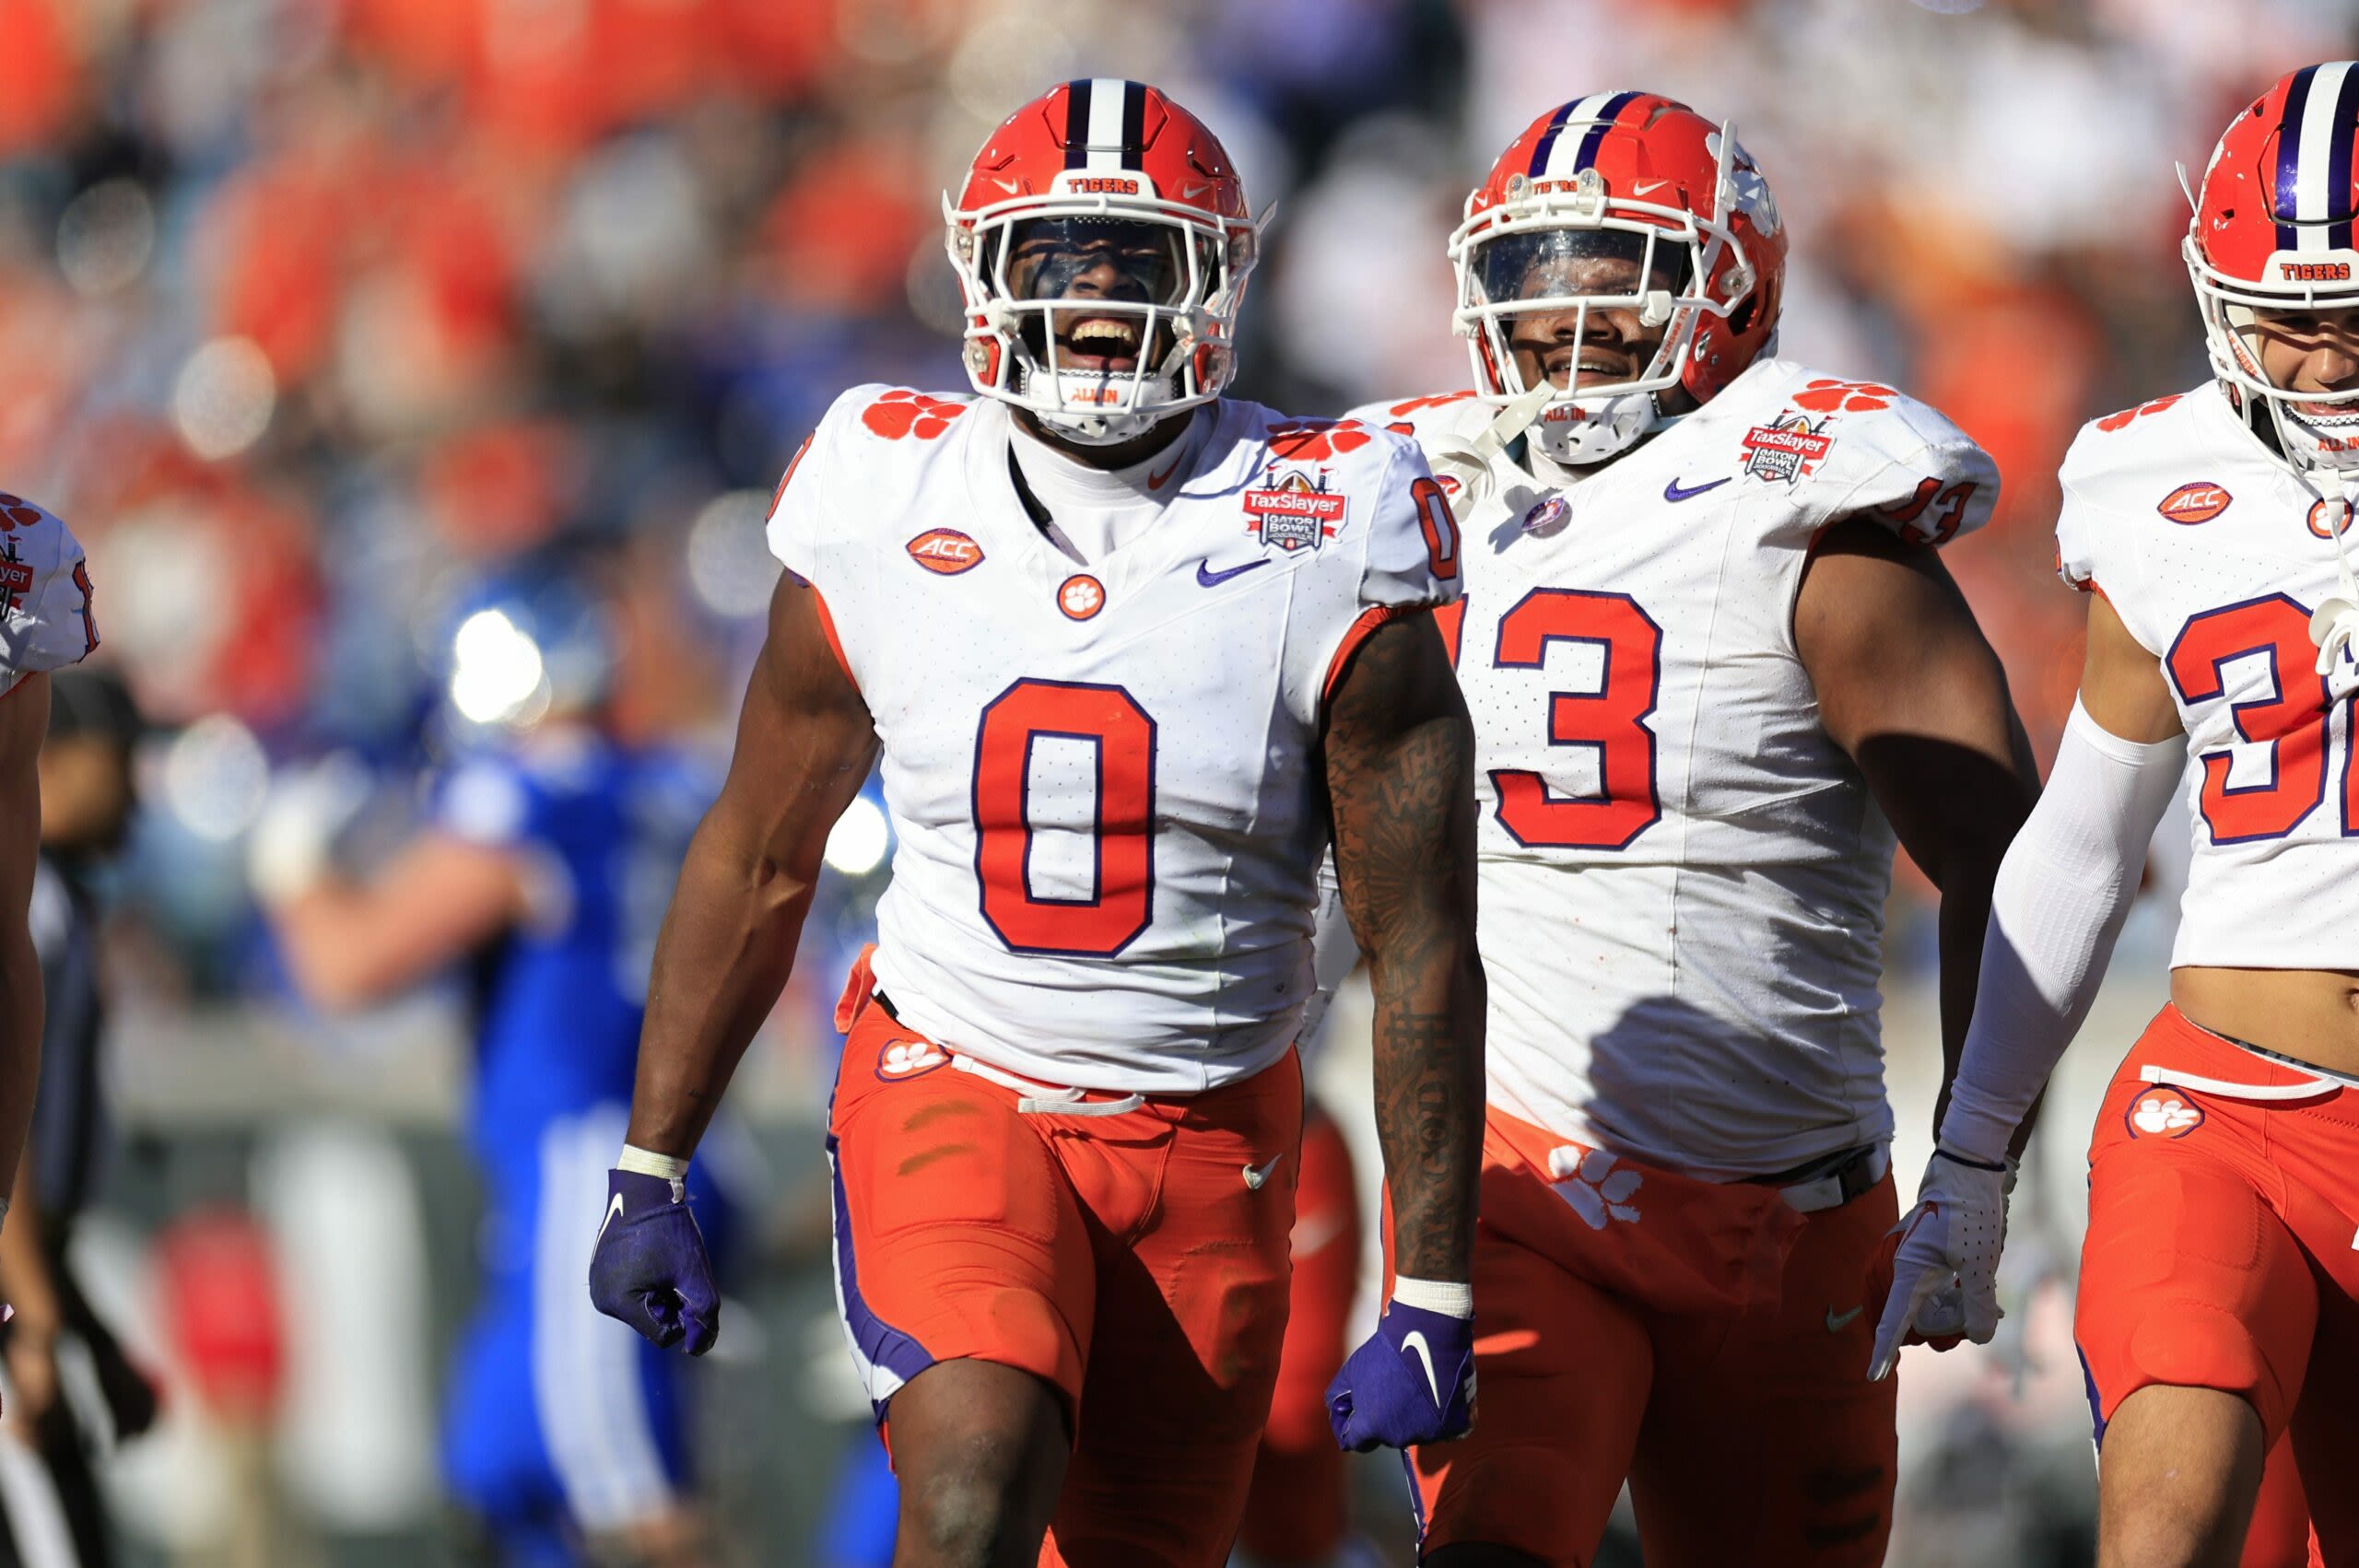 Clemson ranks Top 10 in USA TODAY Sports post-spring college football NCAA Re-Rank 1-134